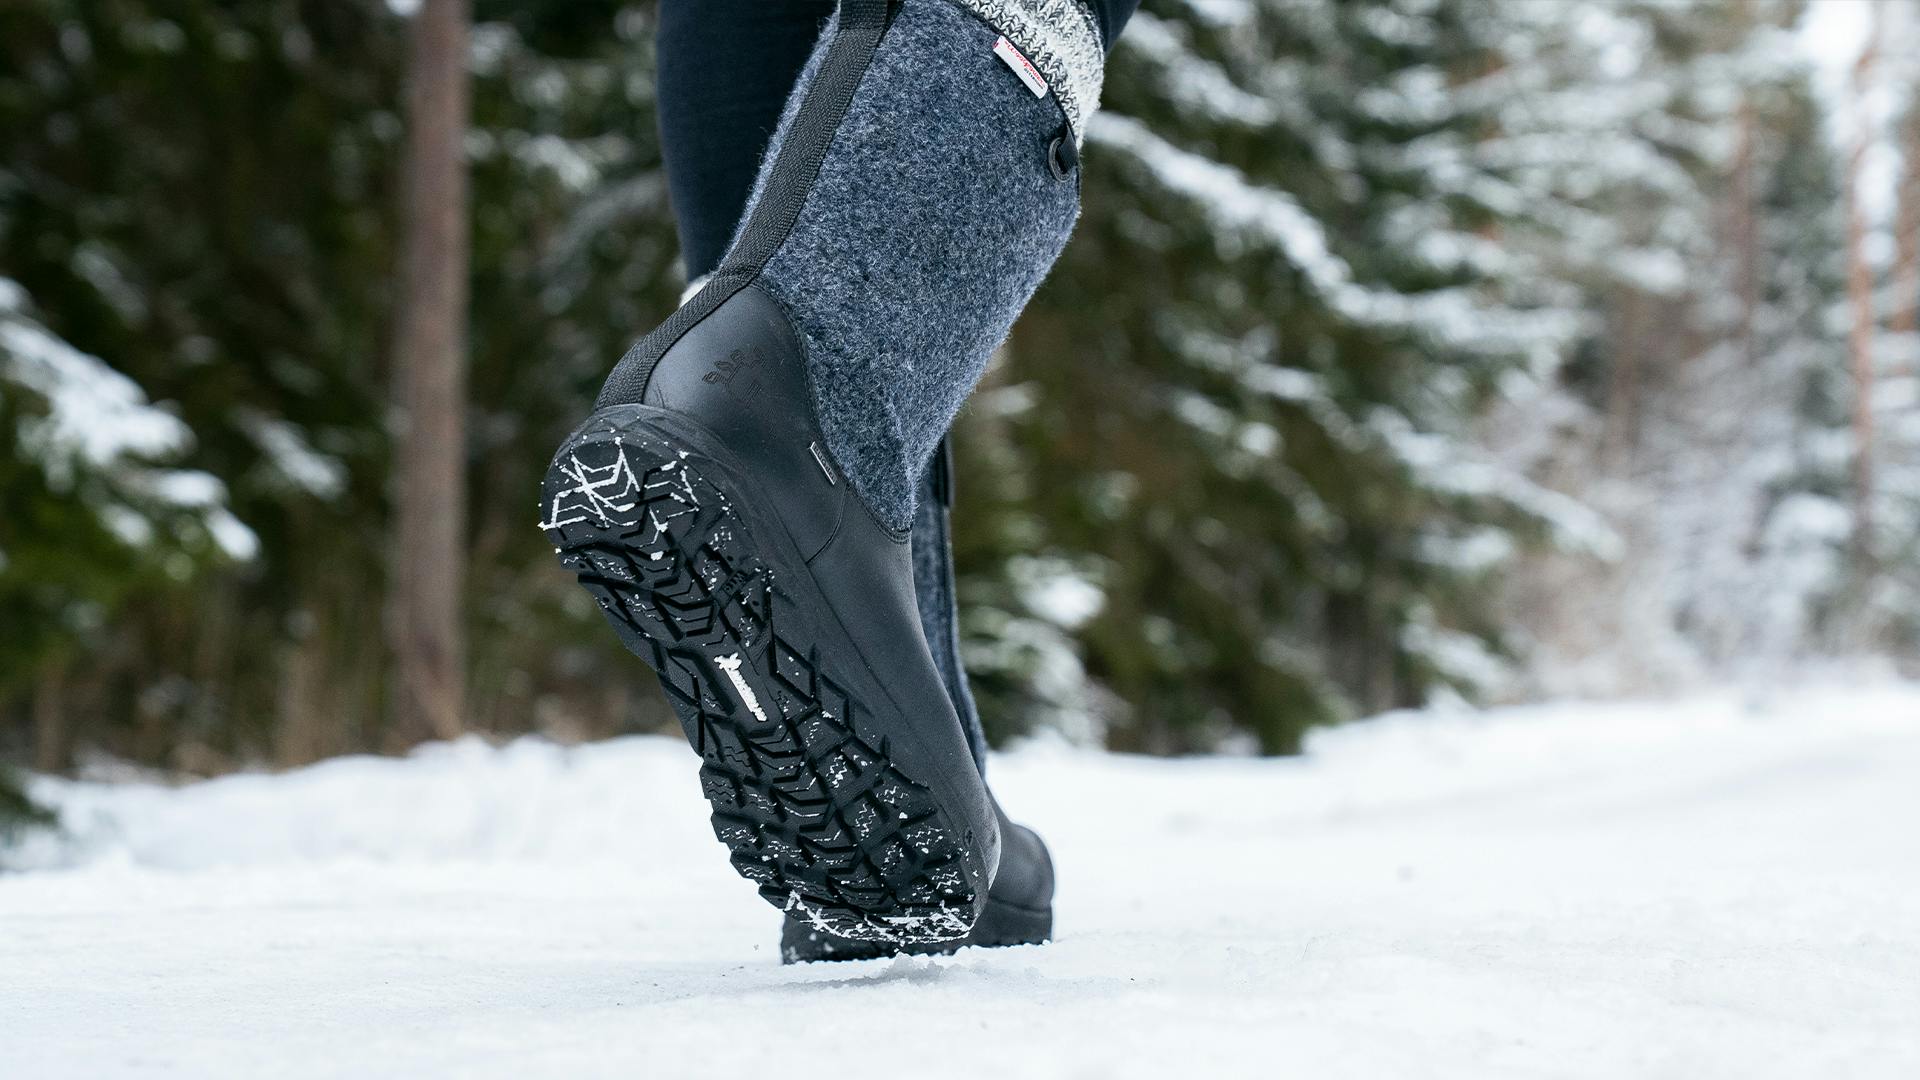 A person walking on a snowy road with a pair of Icebug shoes